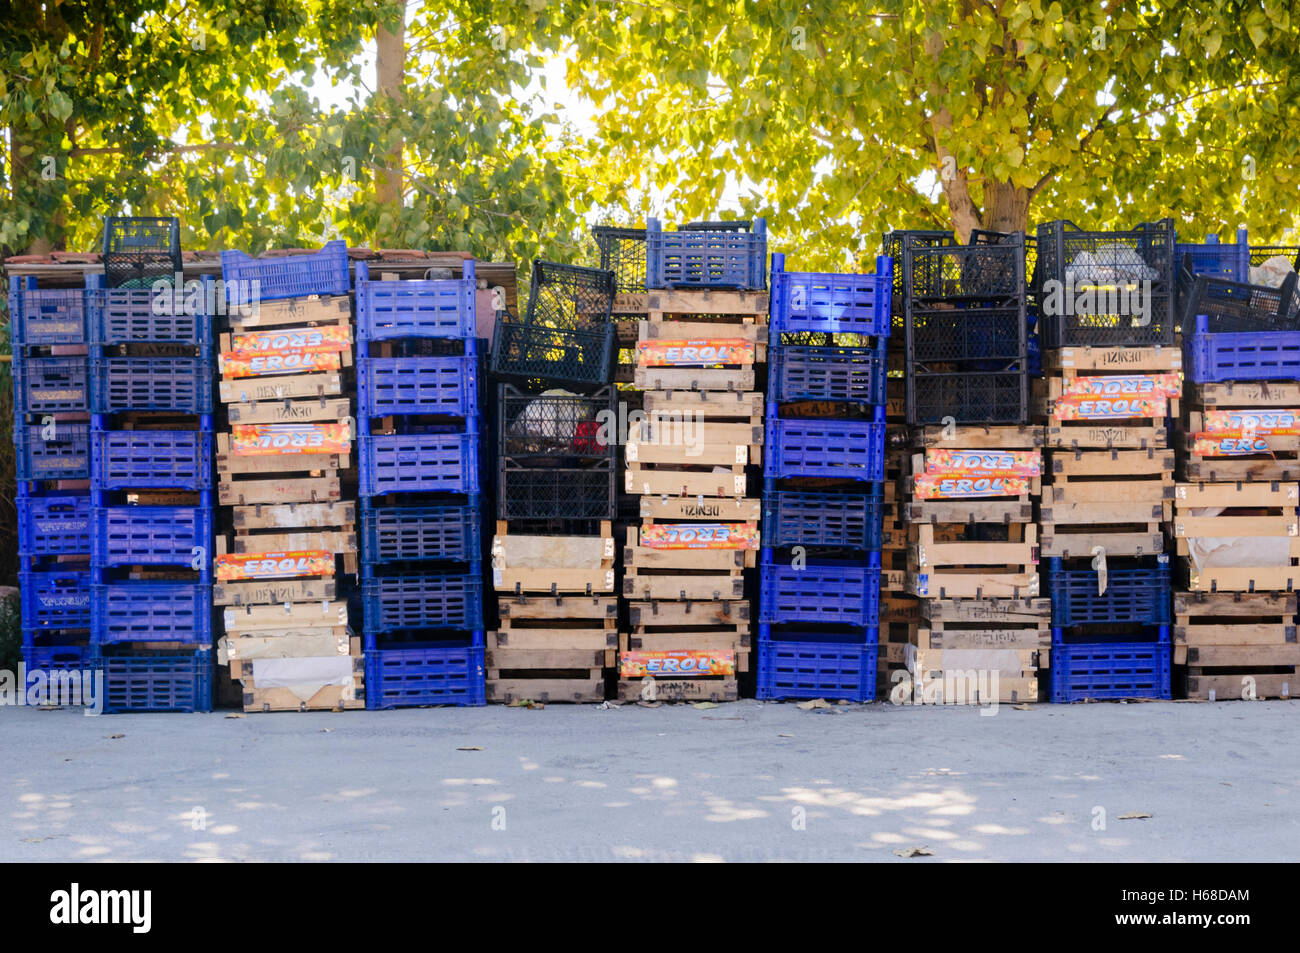 Stacks of wooden and plastic fruit crates behind a Turkish restaurant. Stock Photo